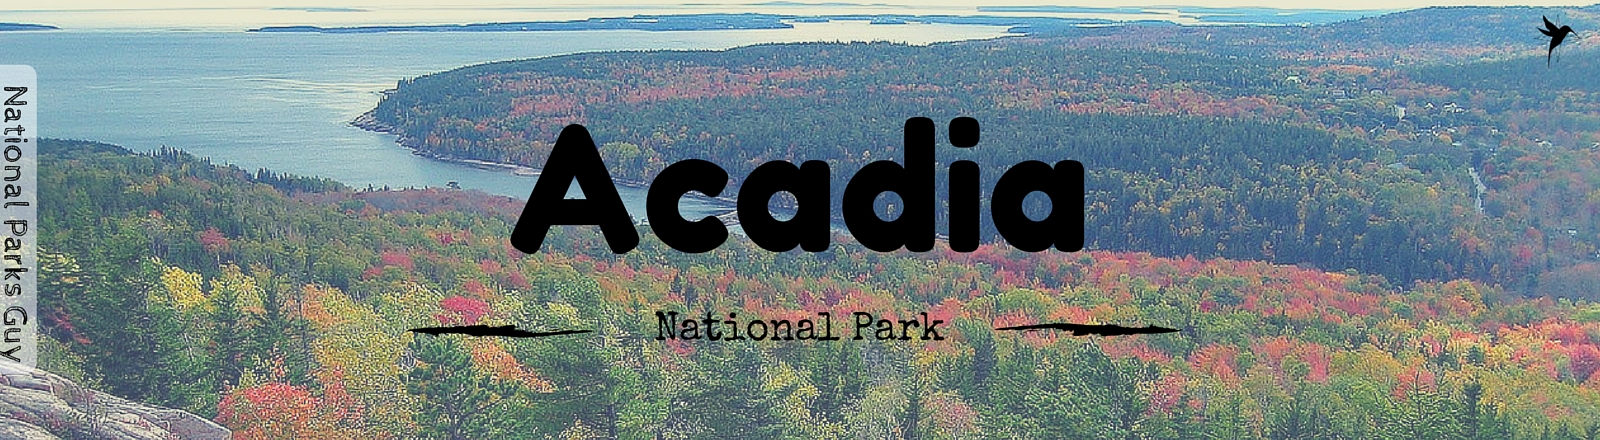 Acadia National Park, USA, National Parks Guy, Stories, Tales, Adventures, Wildlife